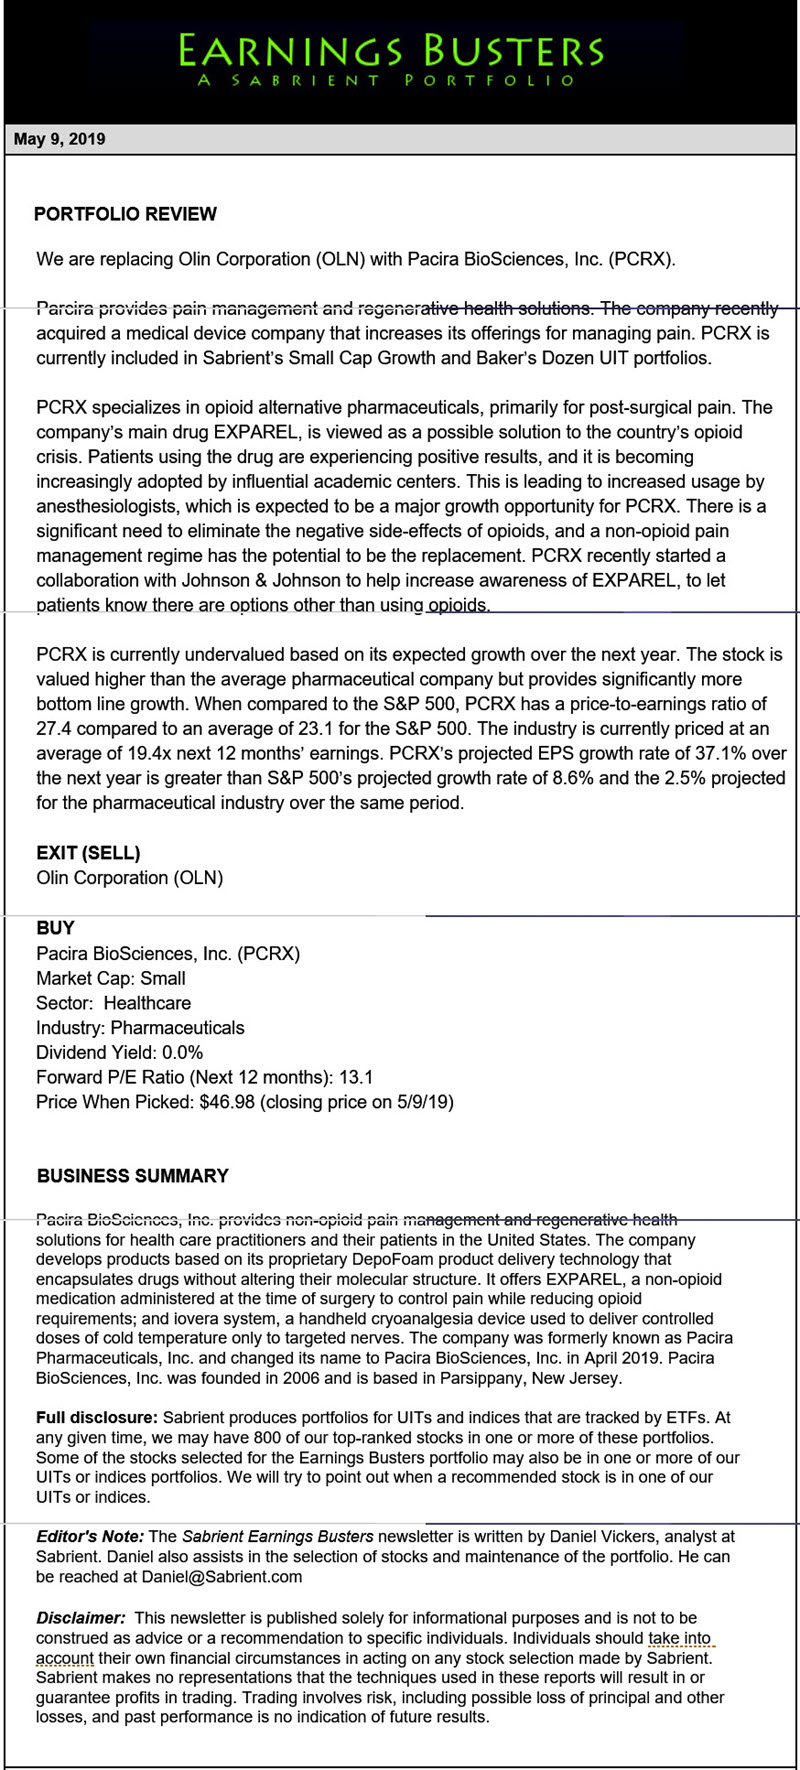 Earnings Busters Newsletter - May 9, 2019